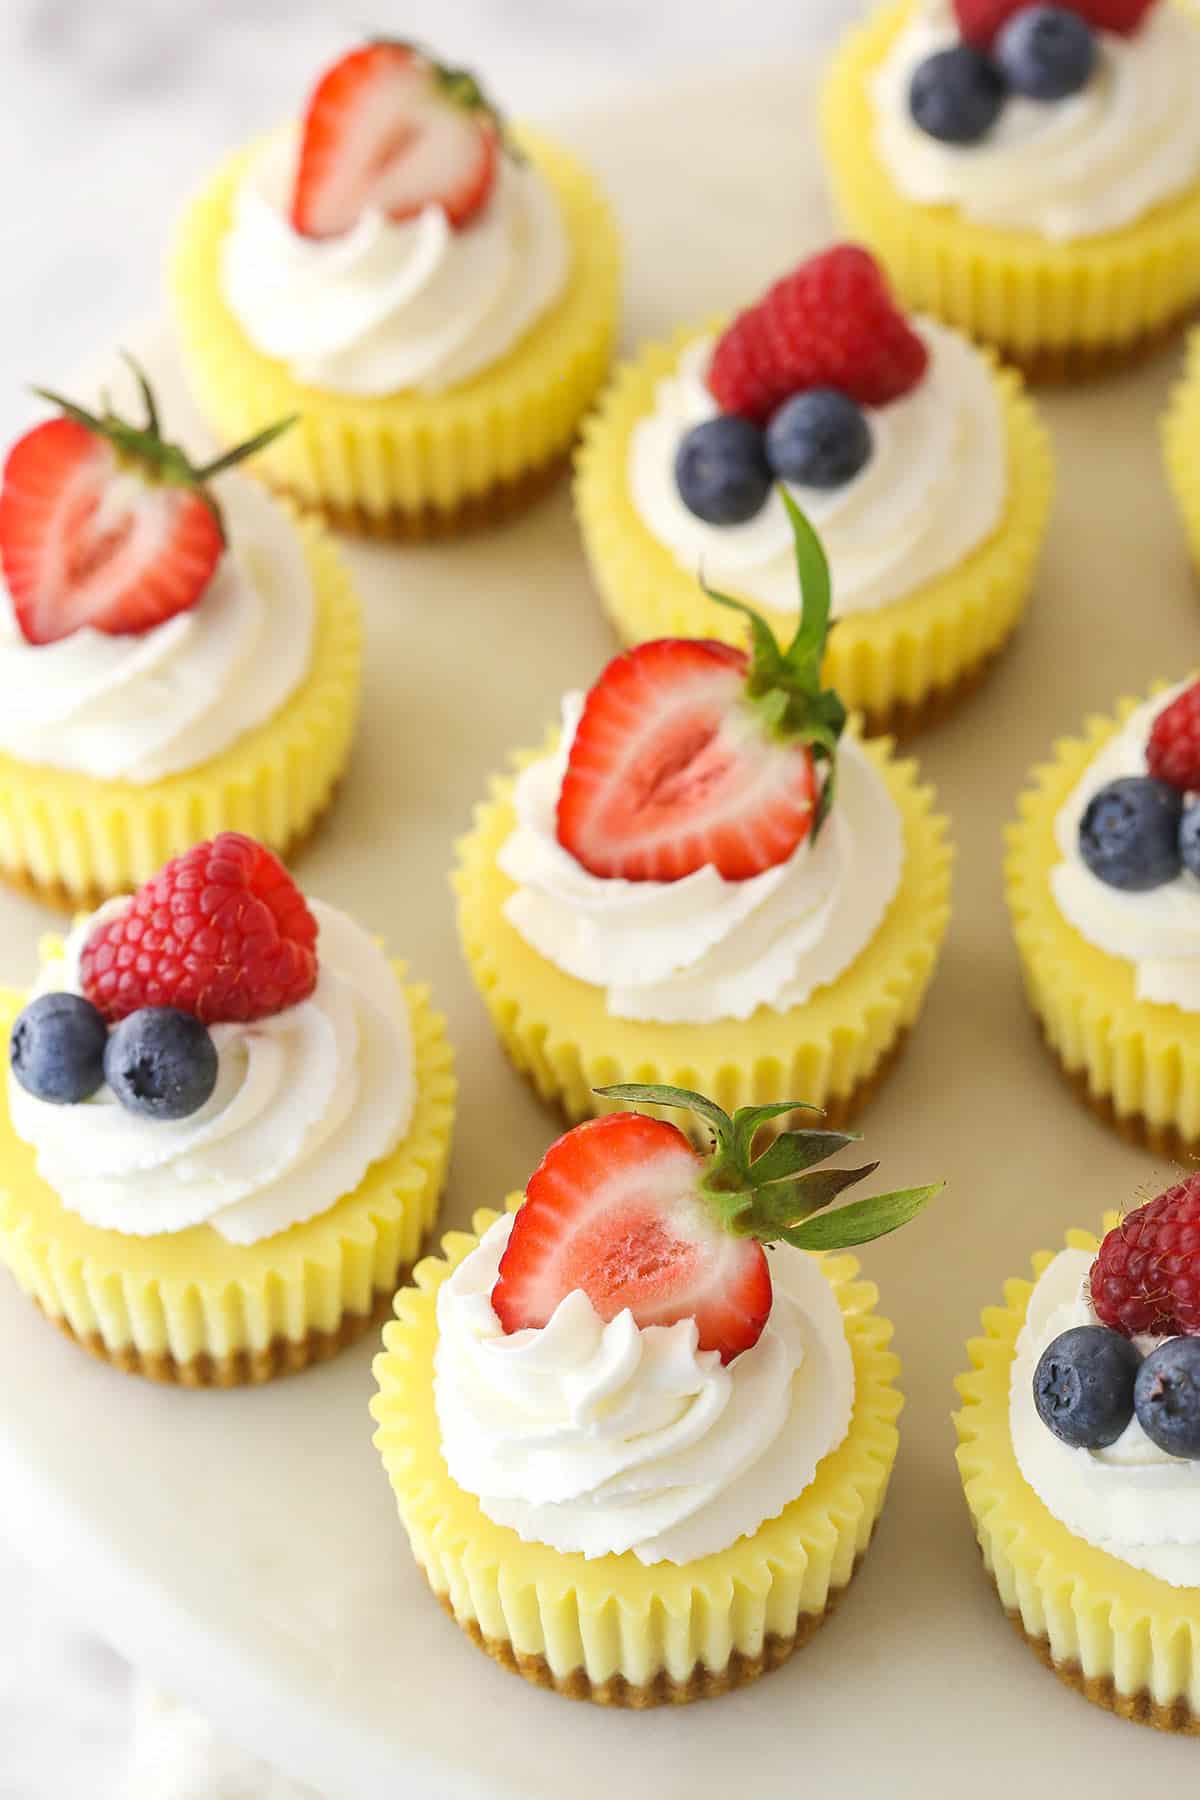 Overhead image of mini cheesecakes topped with fresh fruit.